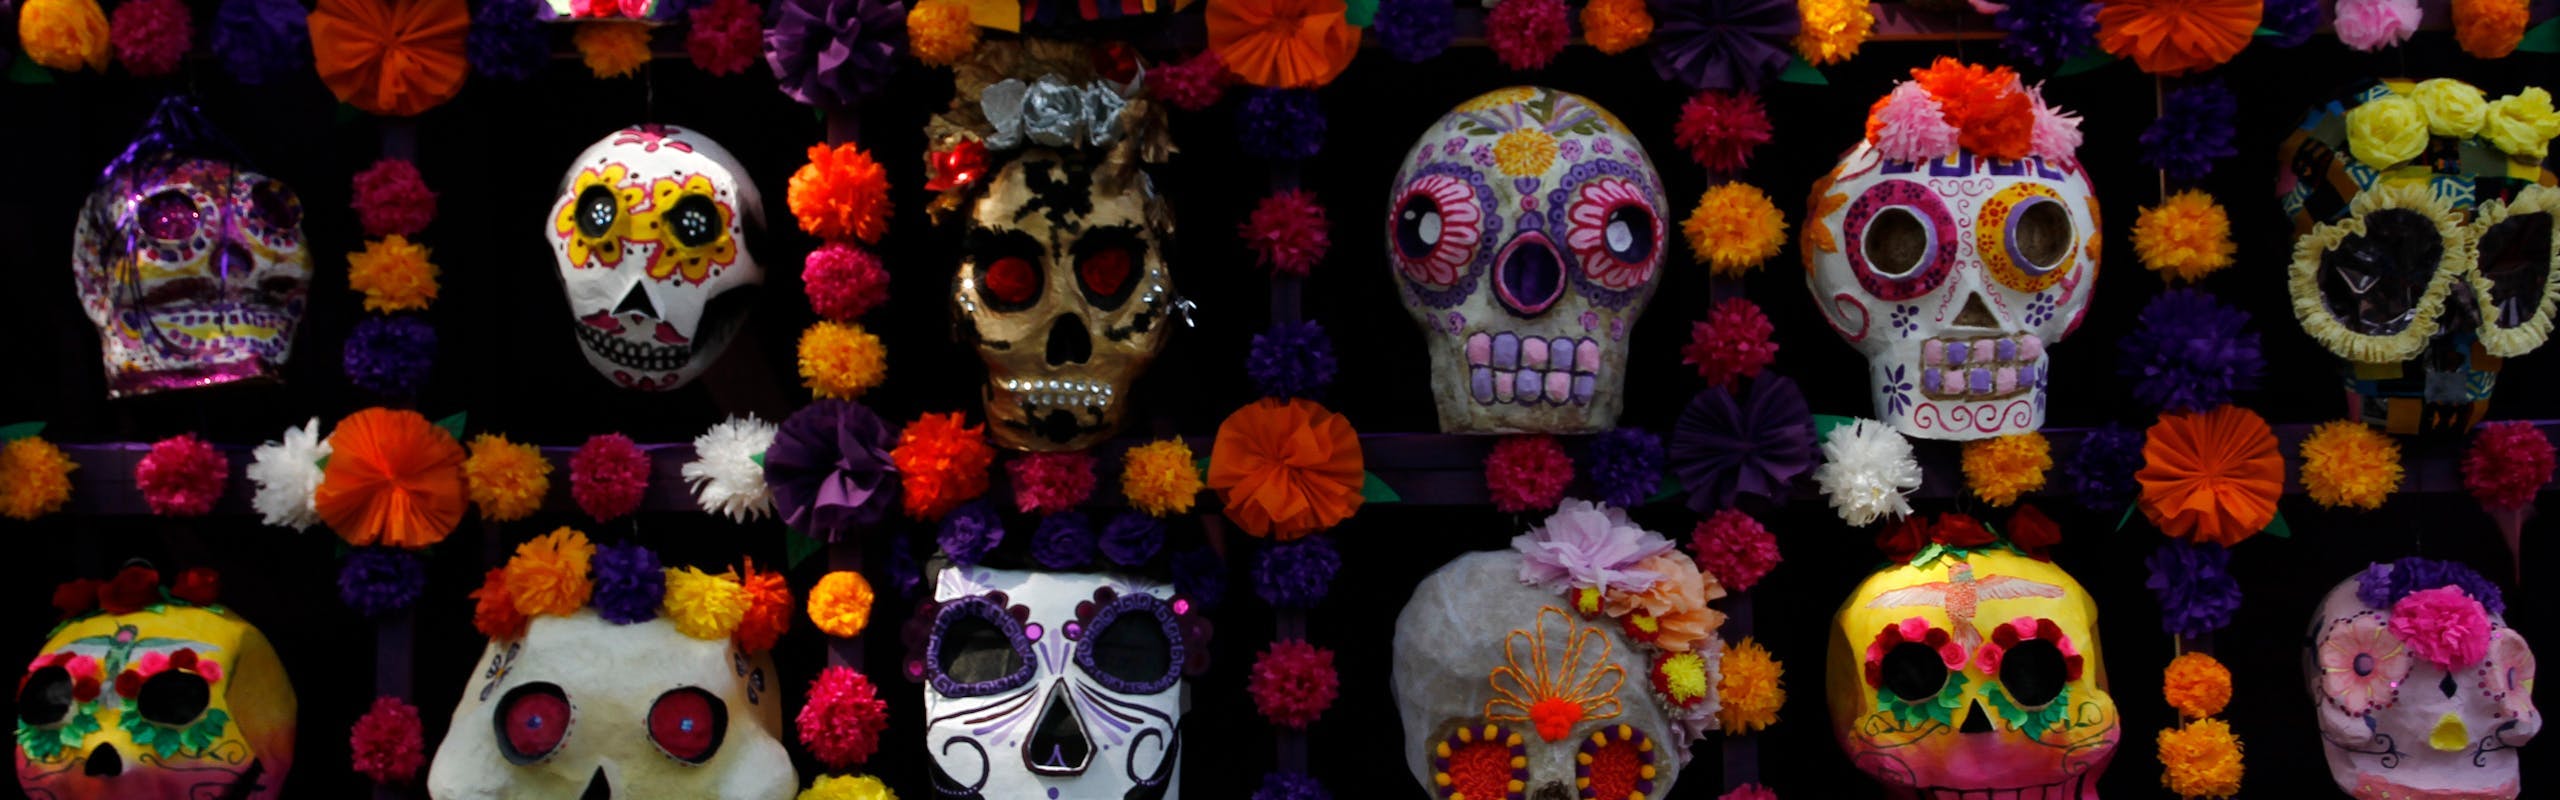 Sugar Skulls attached on a wall with flowers.